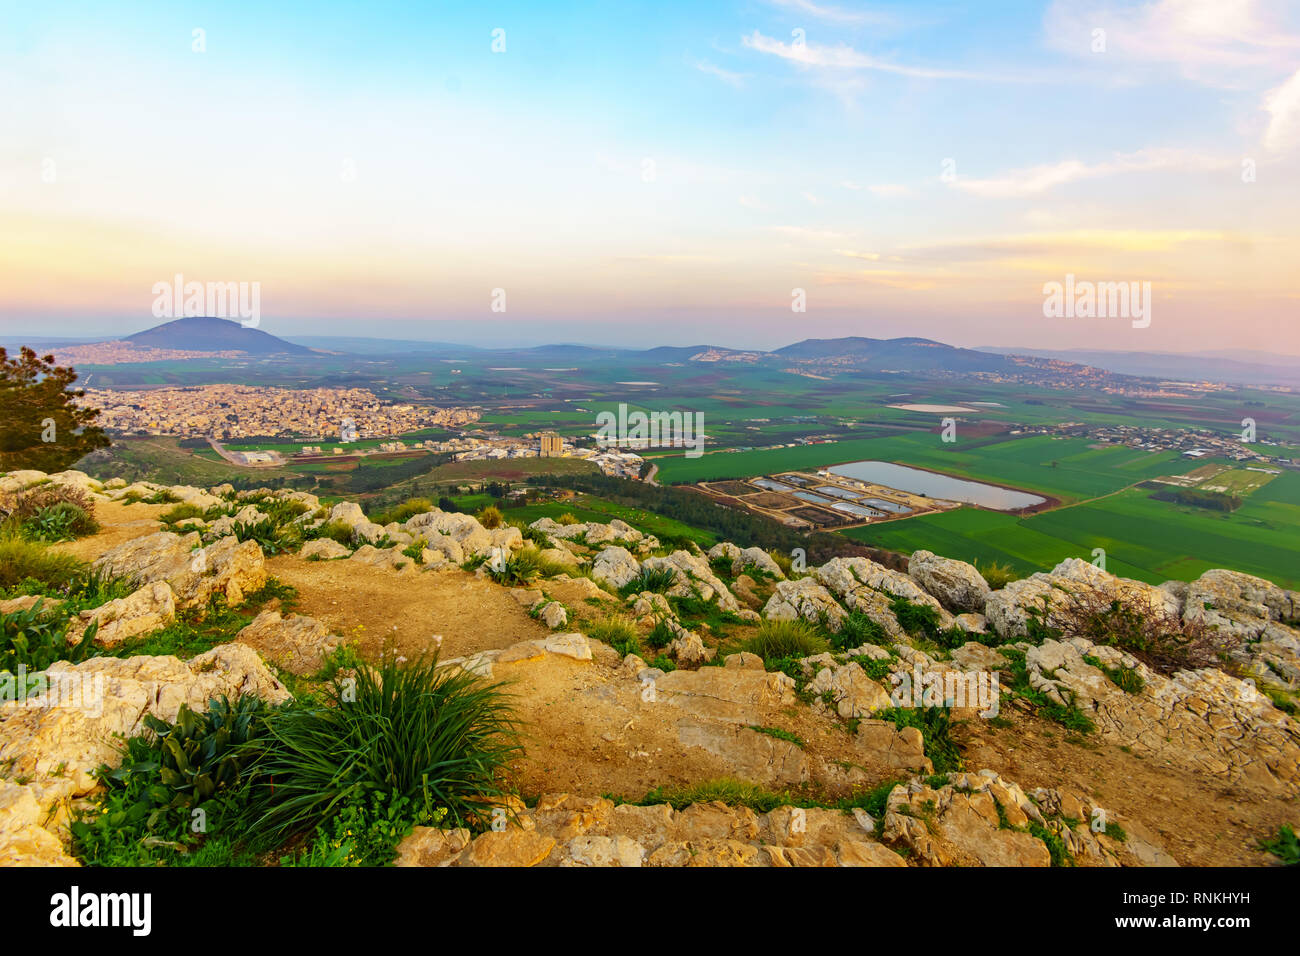 Sunset view of the Jezreel Valley and Mont Tabor, from Mount Precipice. Israel Stock Photo